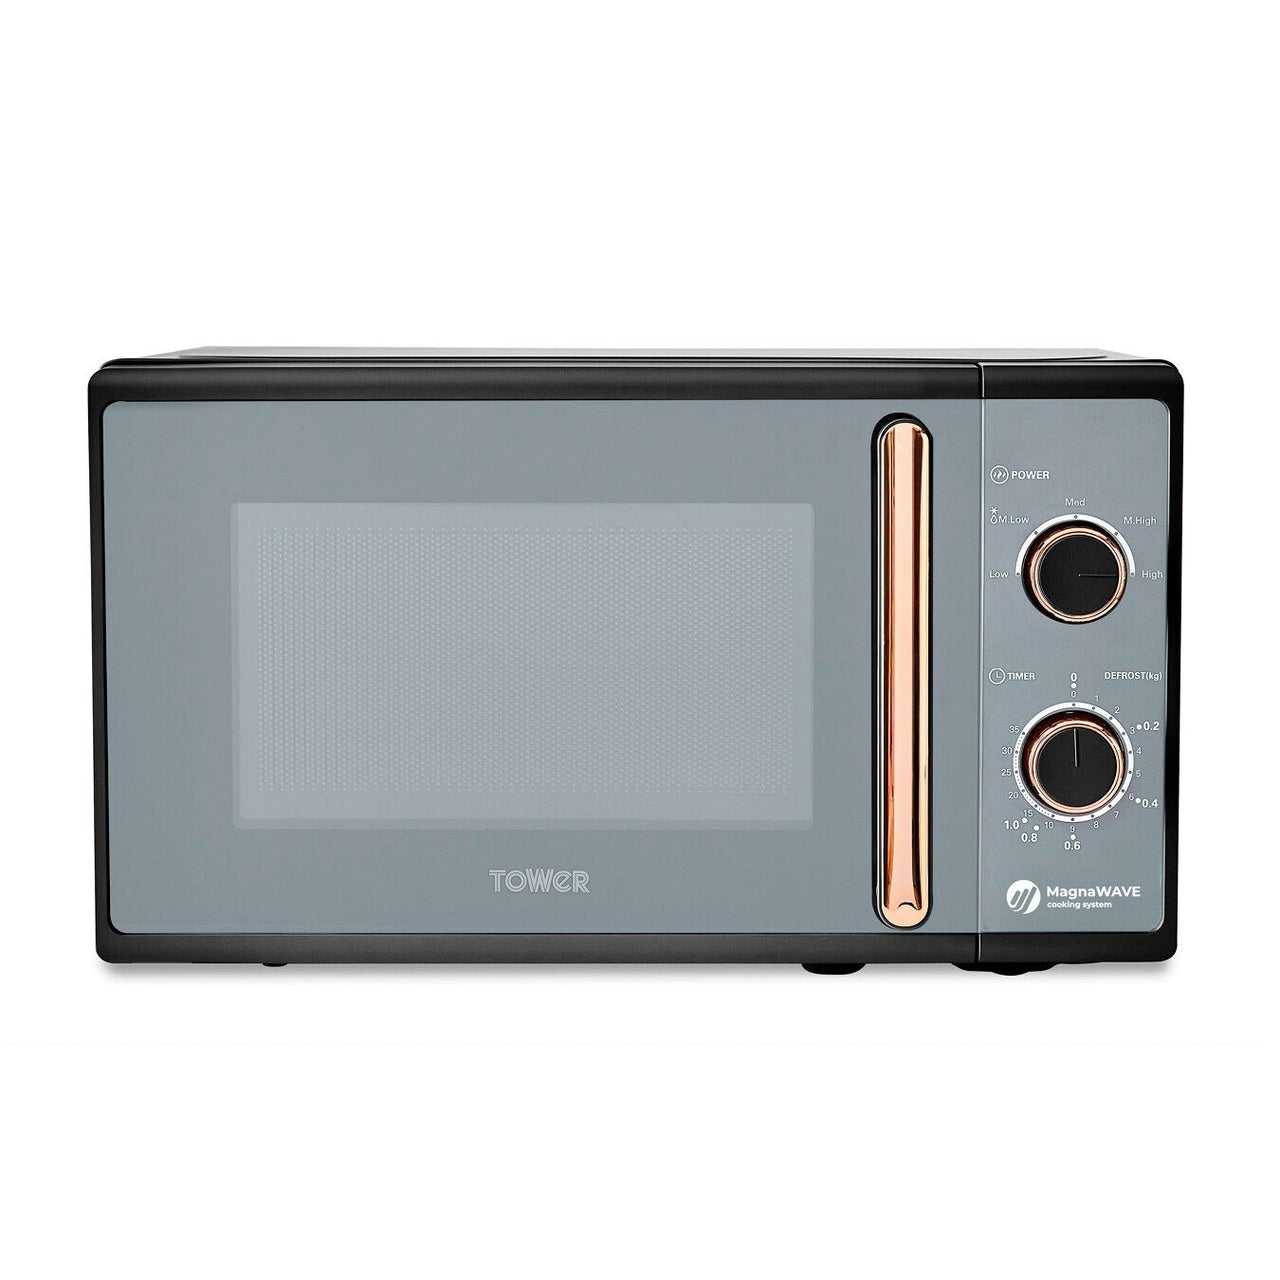 Tower Cavaletto Black & Rose Gold 800W 20L Manual Microwave - 3 Year Guarantee